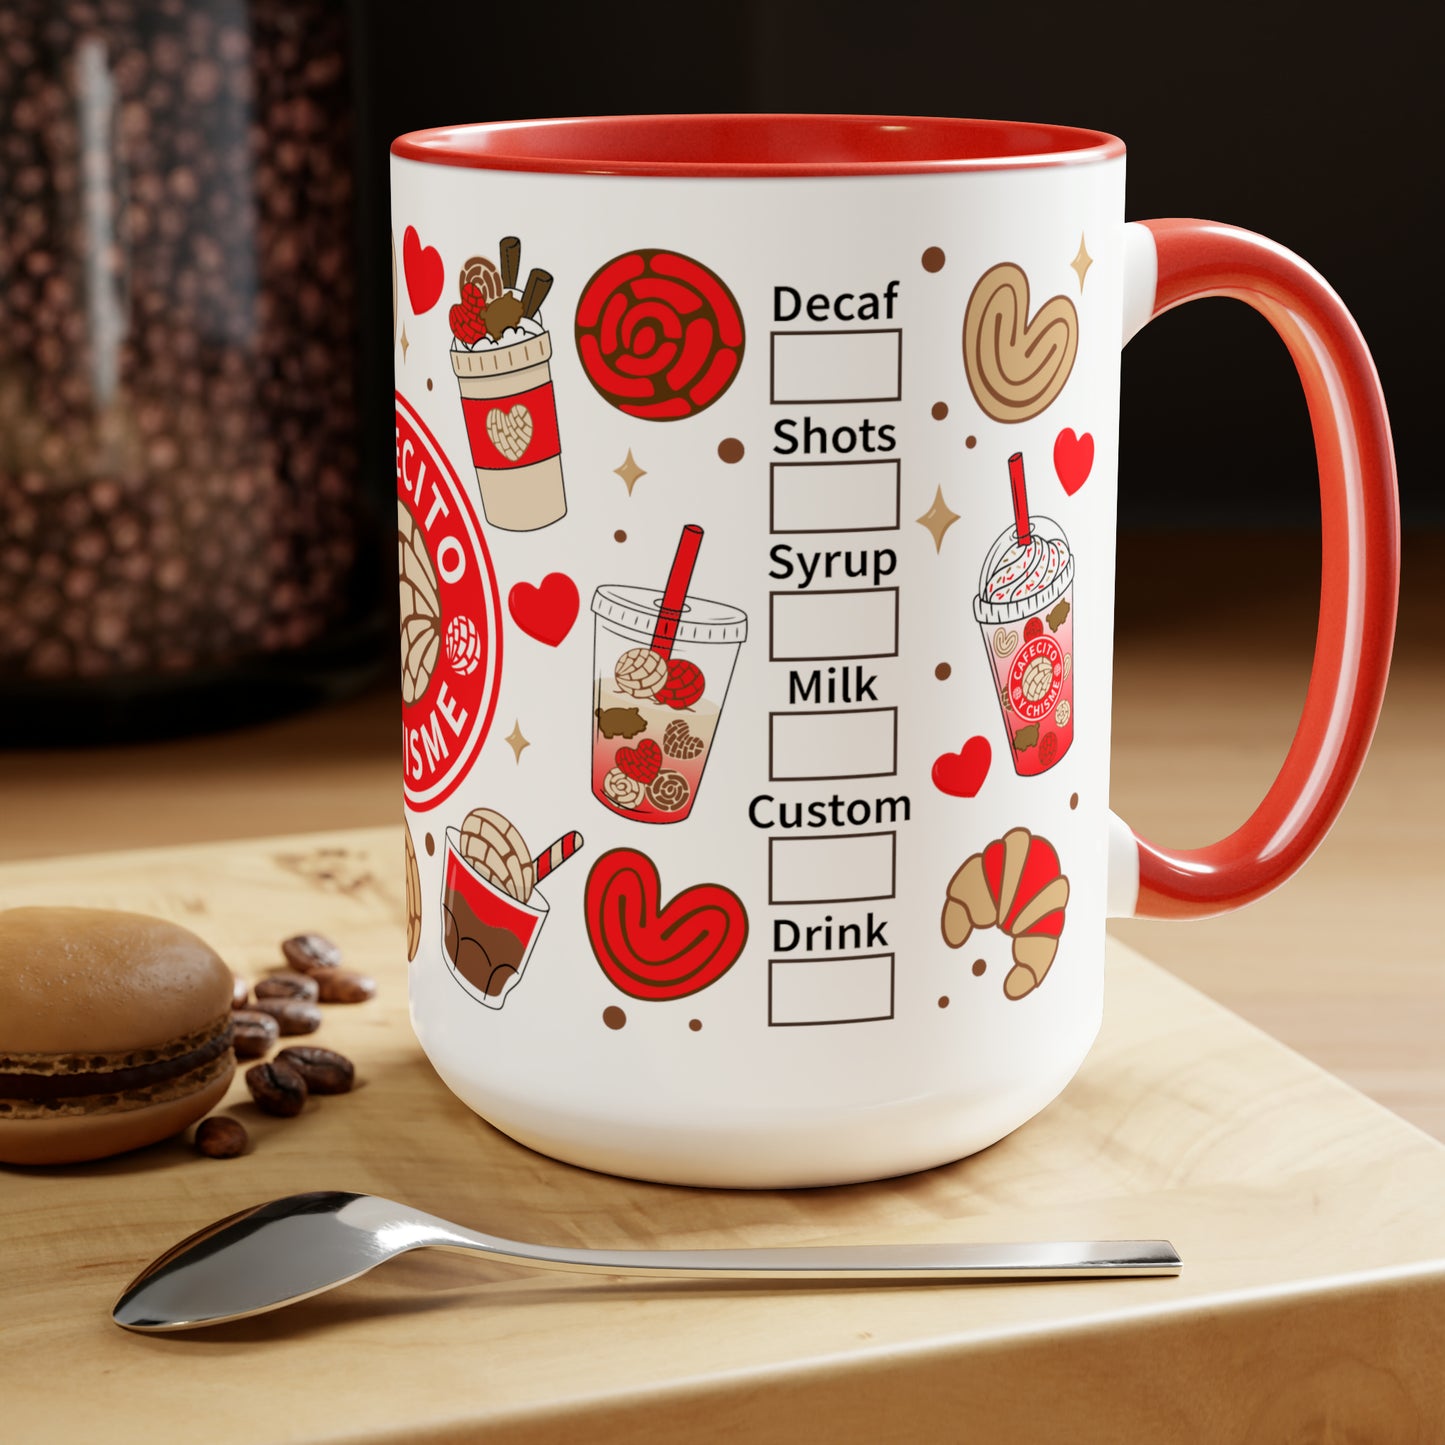 Cafecito y chisme Coffee Mugs, 15oz for chismosas, comadre a, amigas or Mexican mom. Cute Christmas gift for Mexican friend